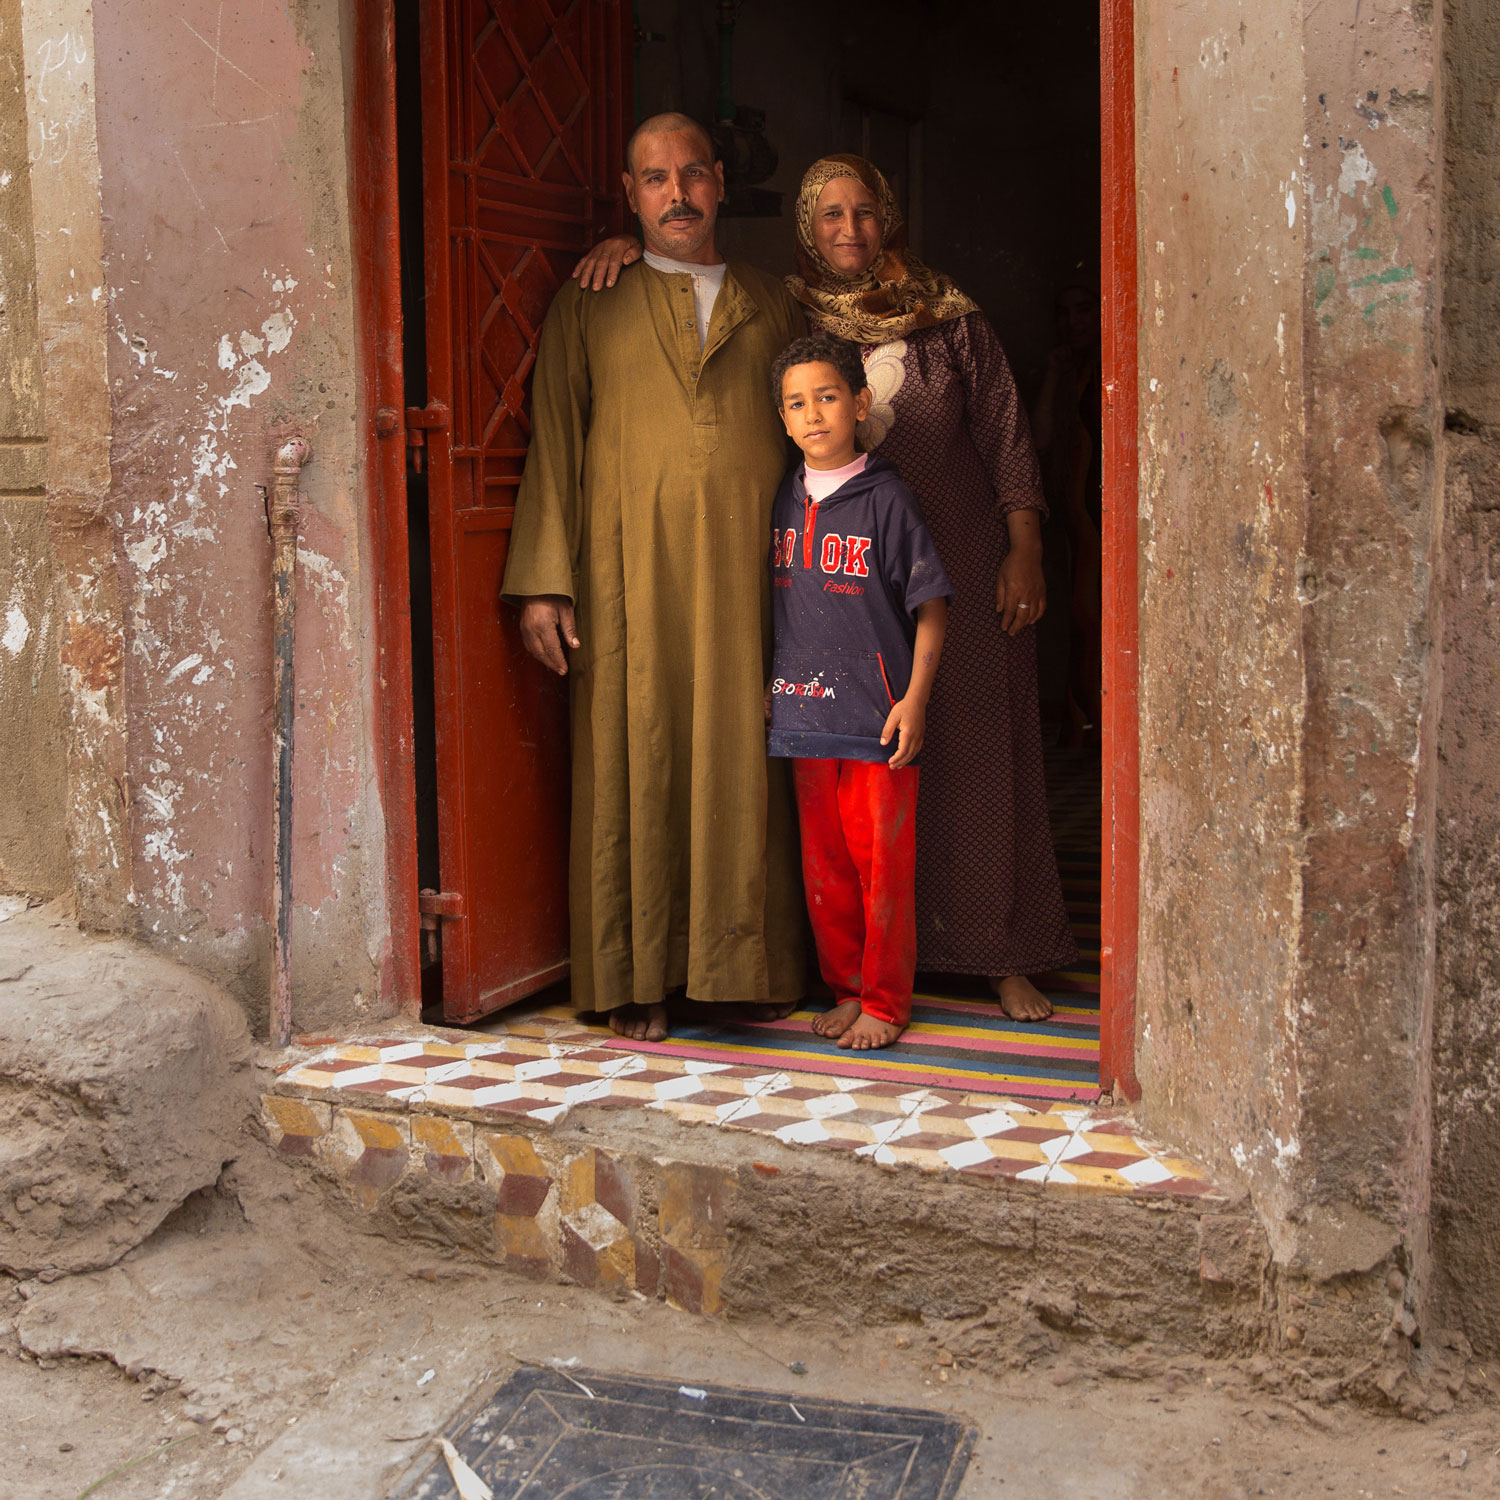  Nada Falwzy and her family have a sewage manhole cover right in front of their home. Before their home had the waste water sanitation connection, they had to rely on the use of a septic tank, which had to be emptied every few weeks. They had a lot of problems including bug bites, roaches and mosquitos.  Now with the sanitation connection, they save money and no longer have to worry about contaminated water in their home.   Photo for USAID/Egypt.  